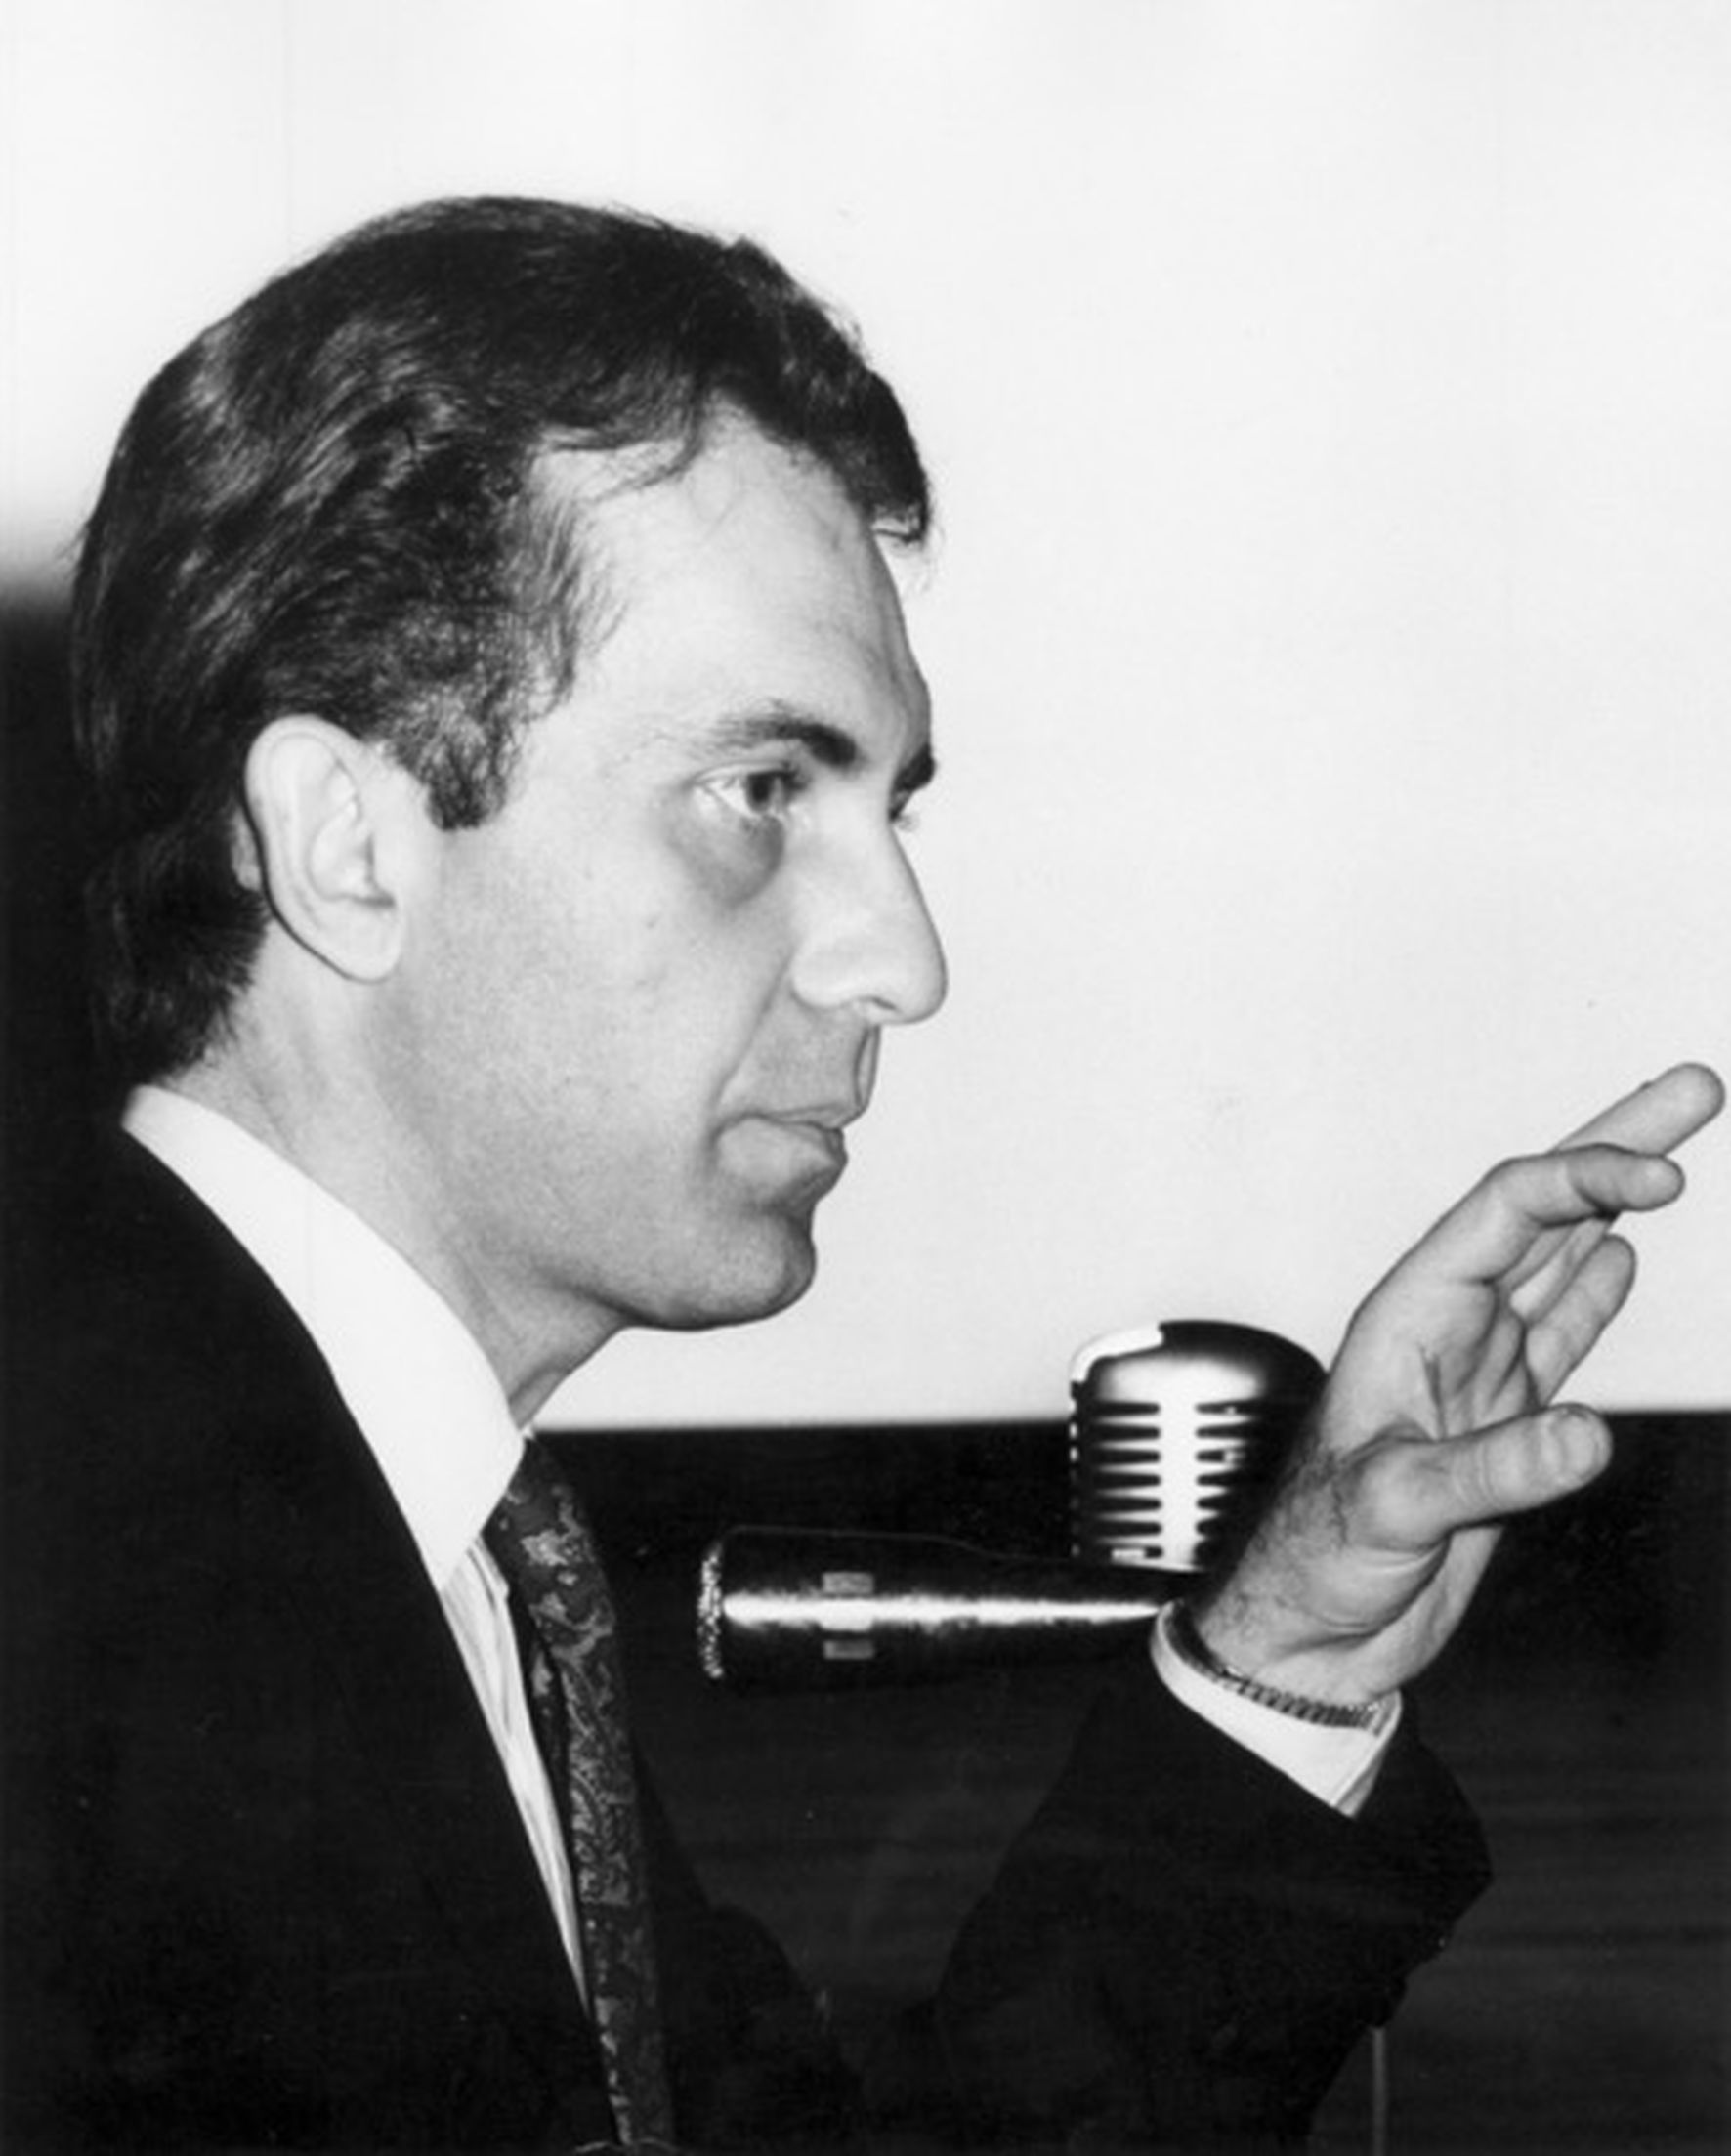 gregory-markopoulos-in-the-1960s.jpg